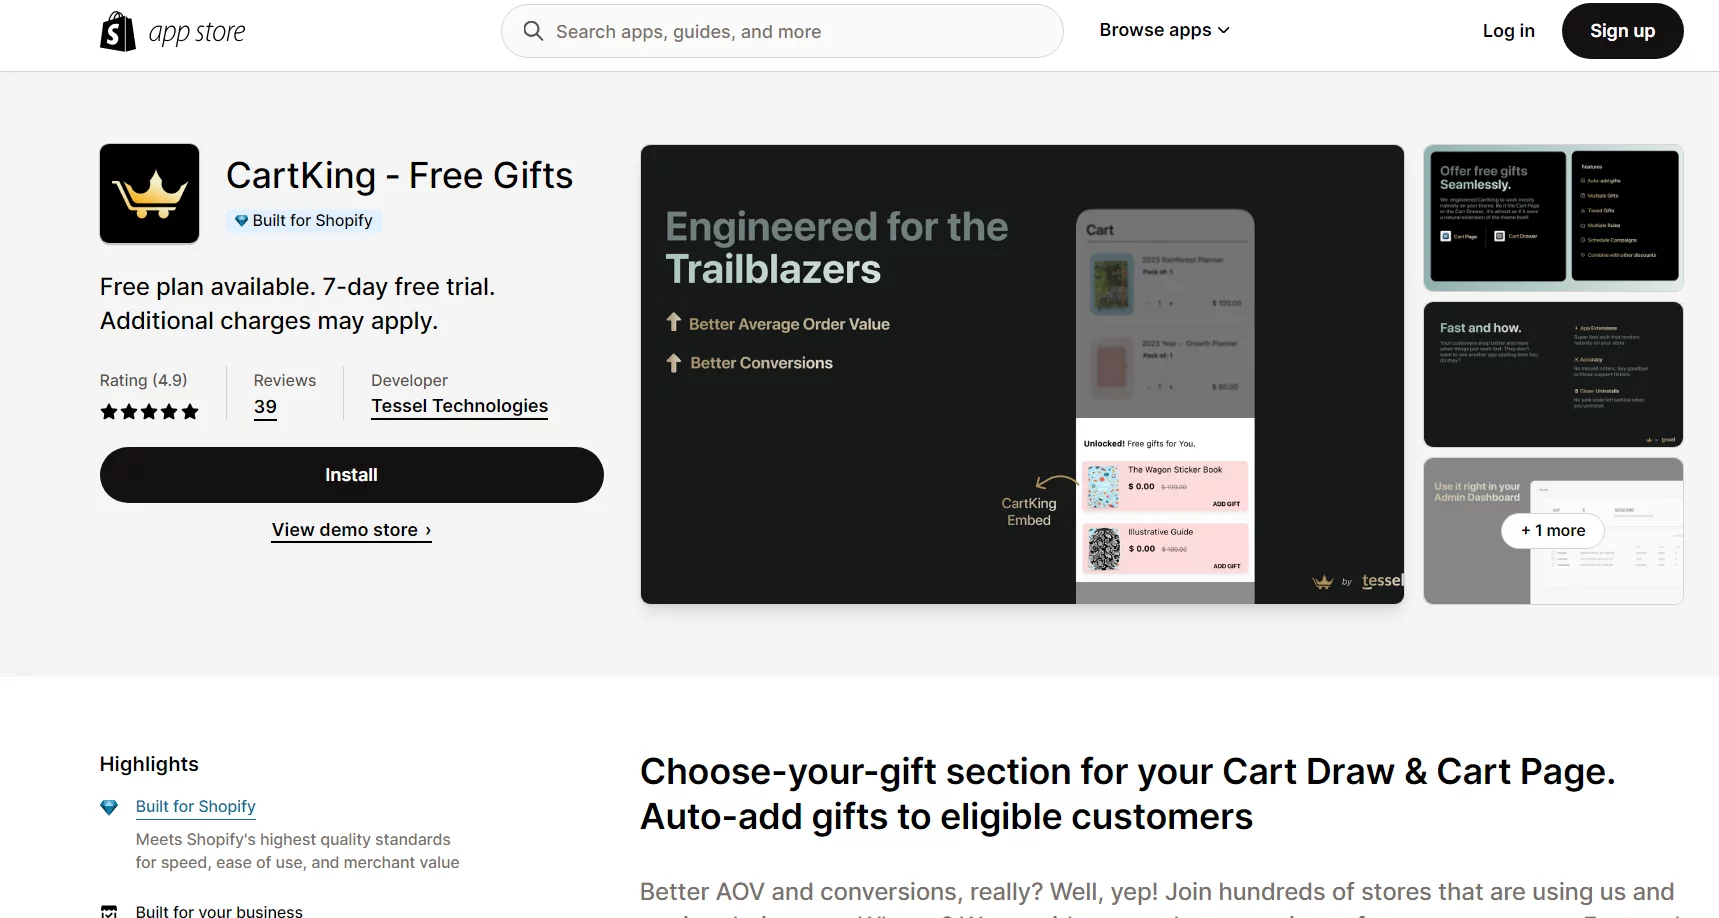 Best Free SEO Apps for Shopify: CartKing ‑ Free Gifts